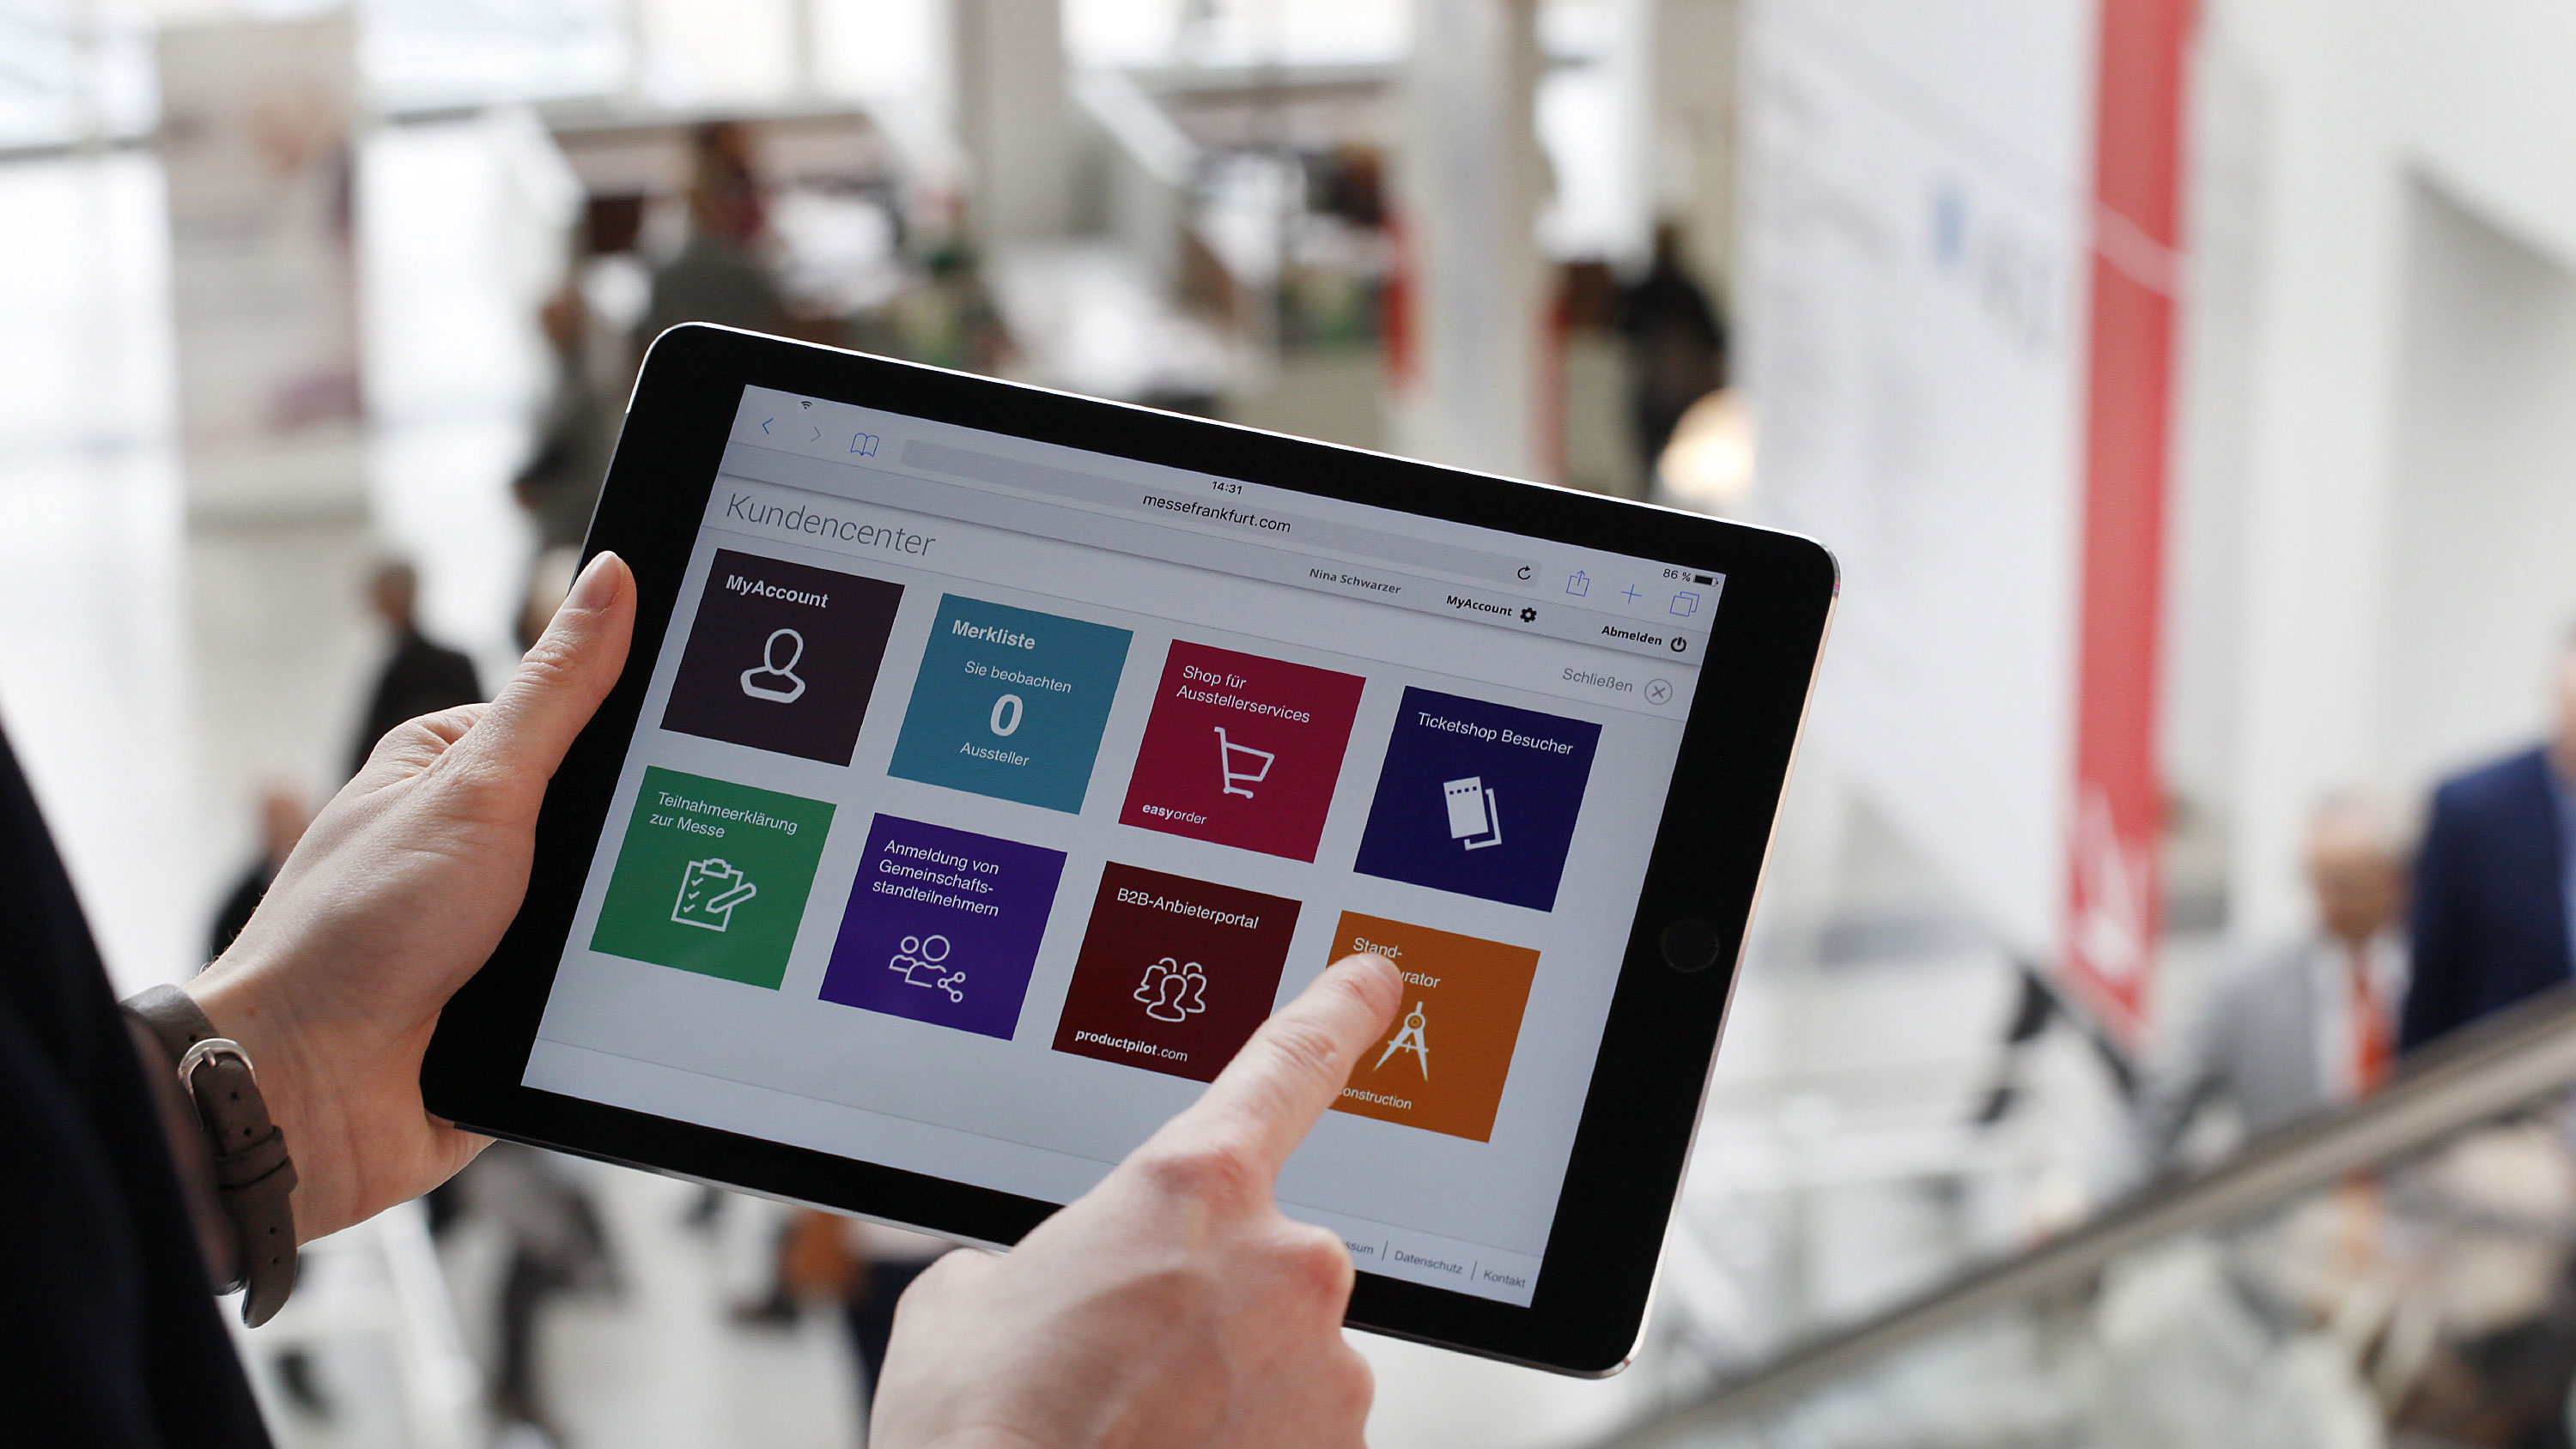 On a tablet, the shop for exhibitor services is open